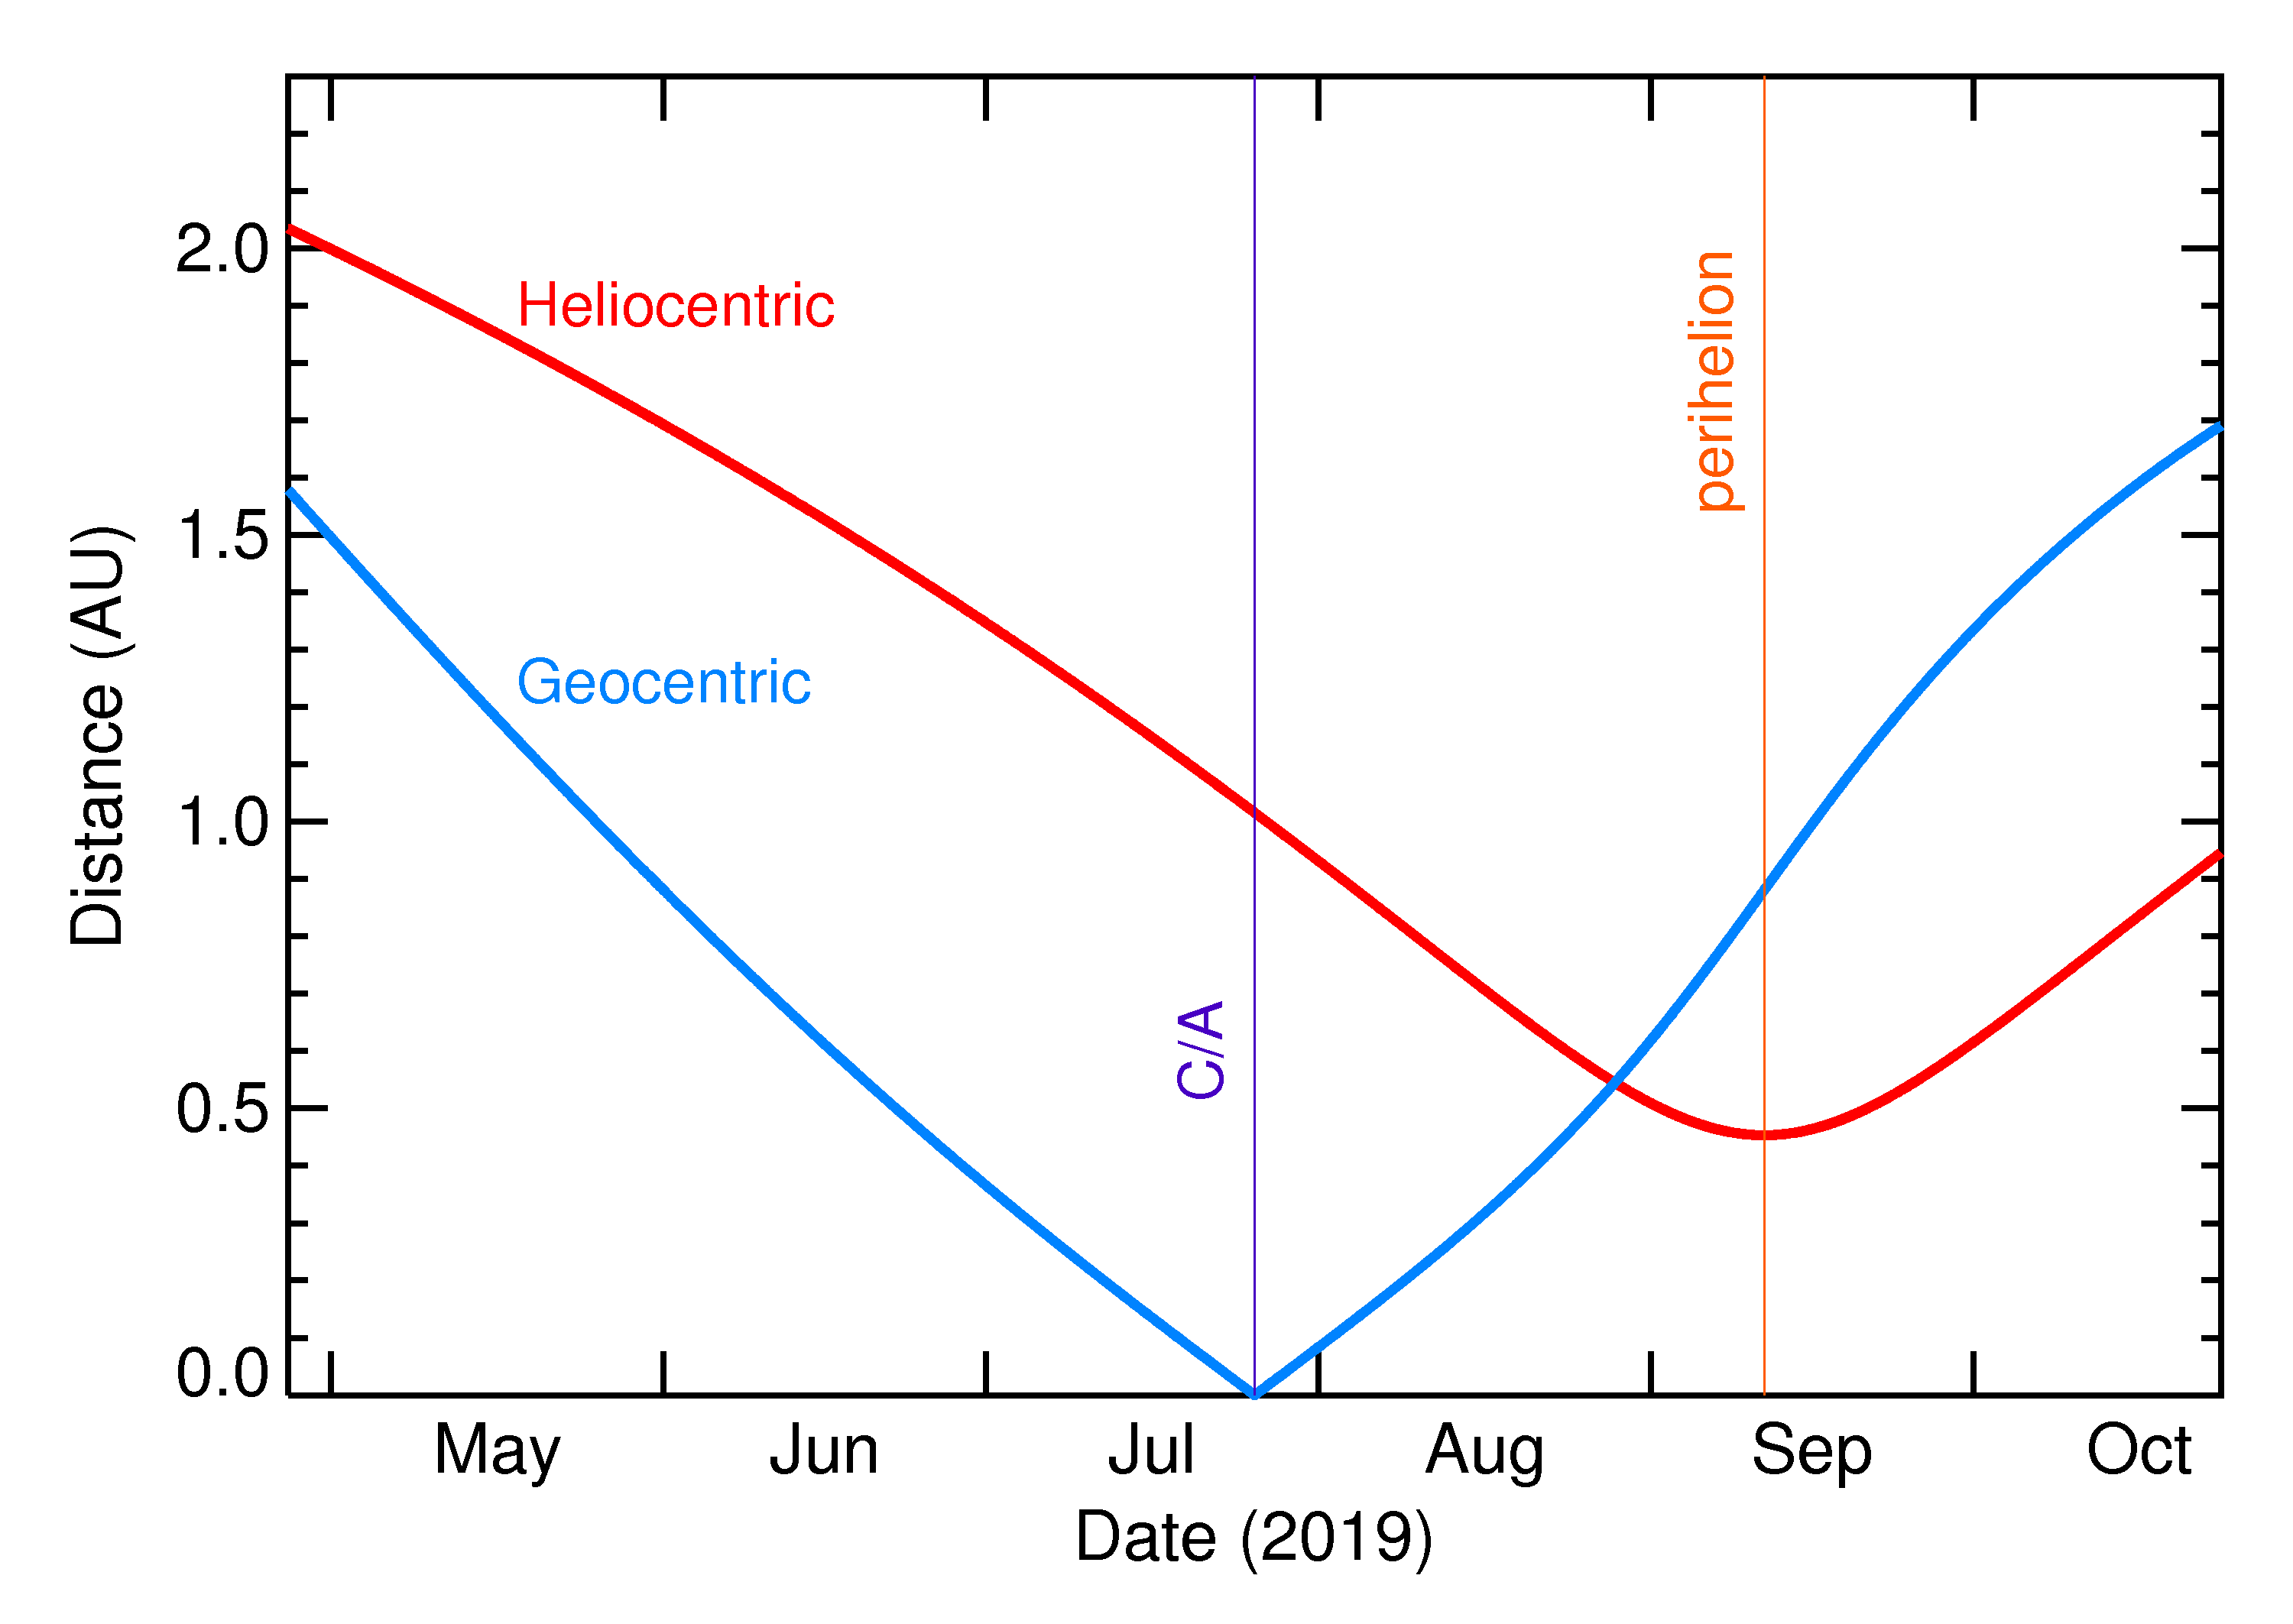 Heliocentric and Geocentric Distances of 2019 OK in the months around closest approach